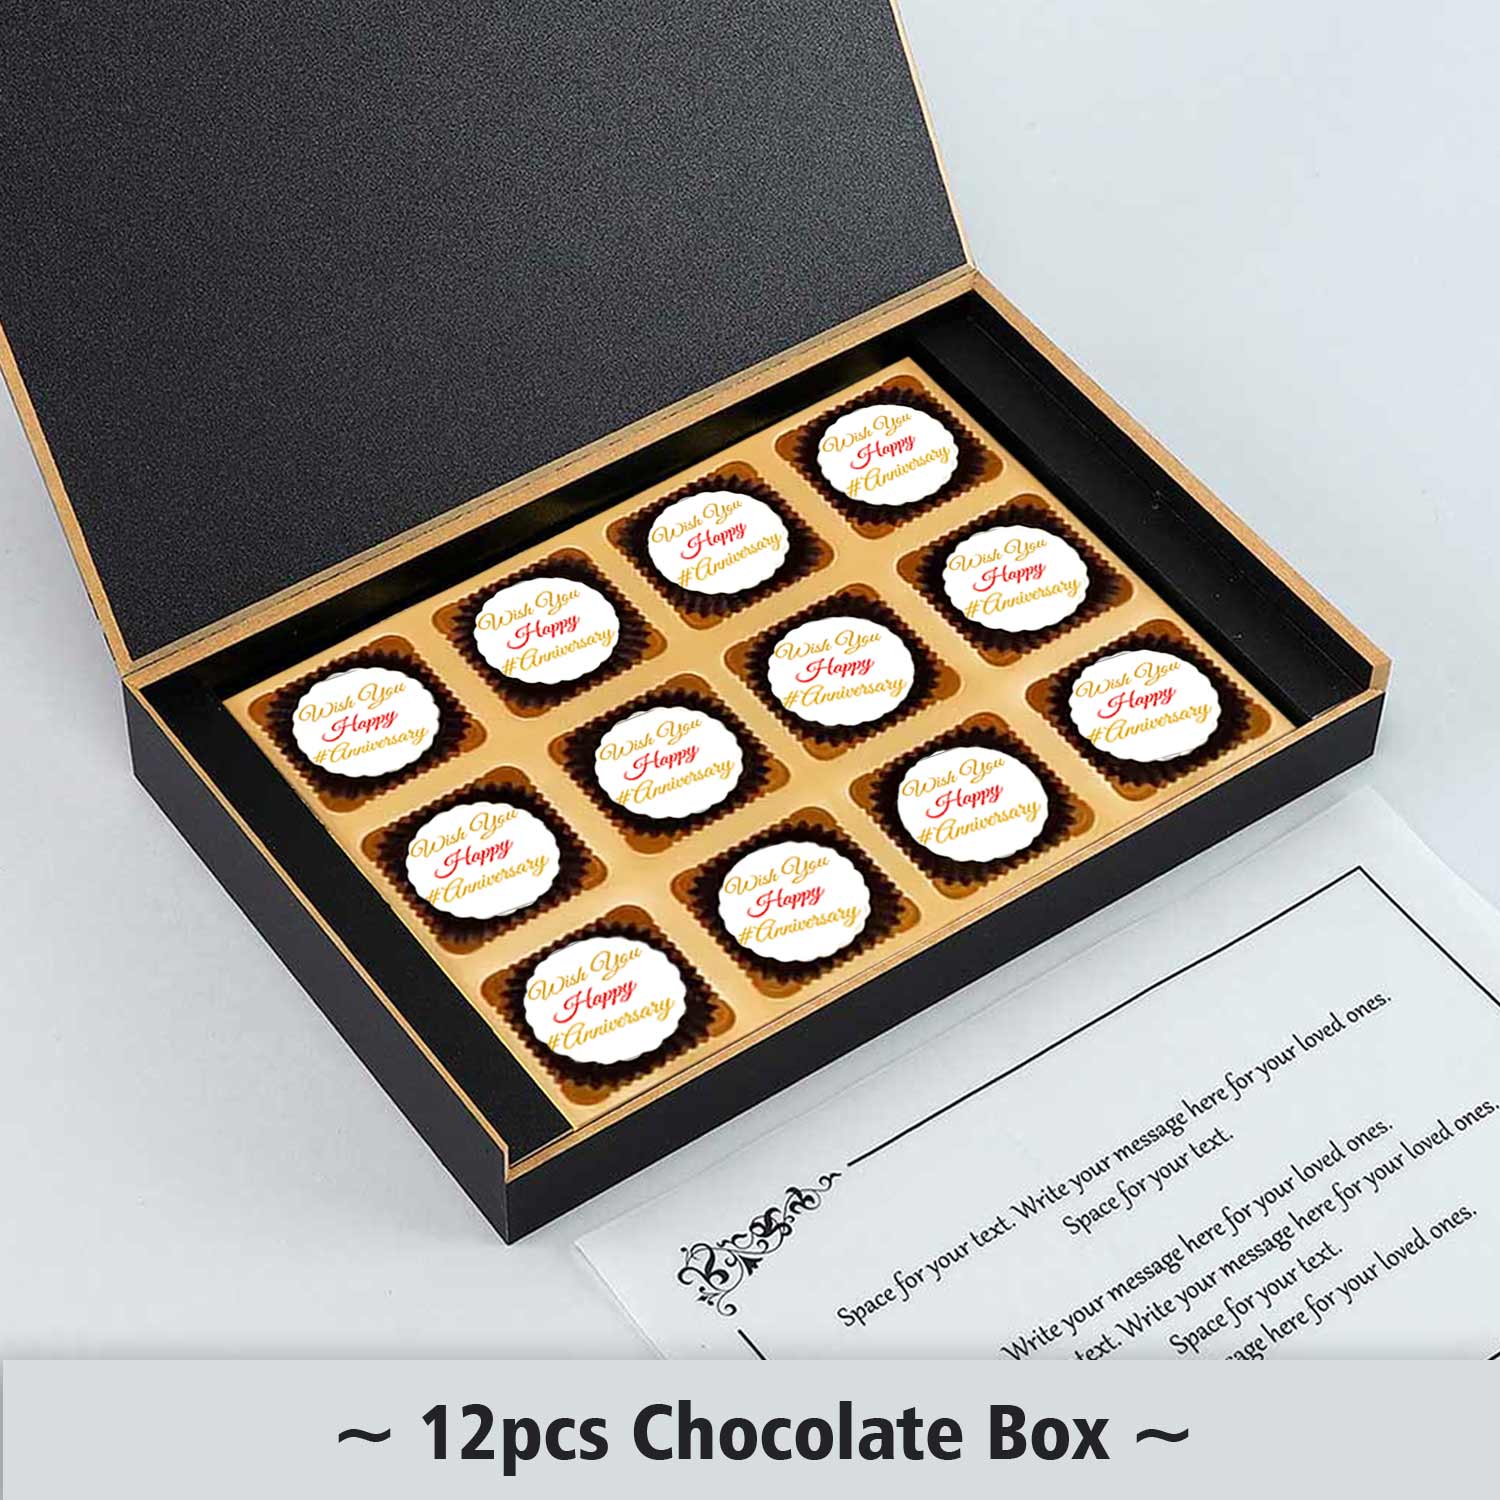 Personalized chocolates with romantic message